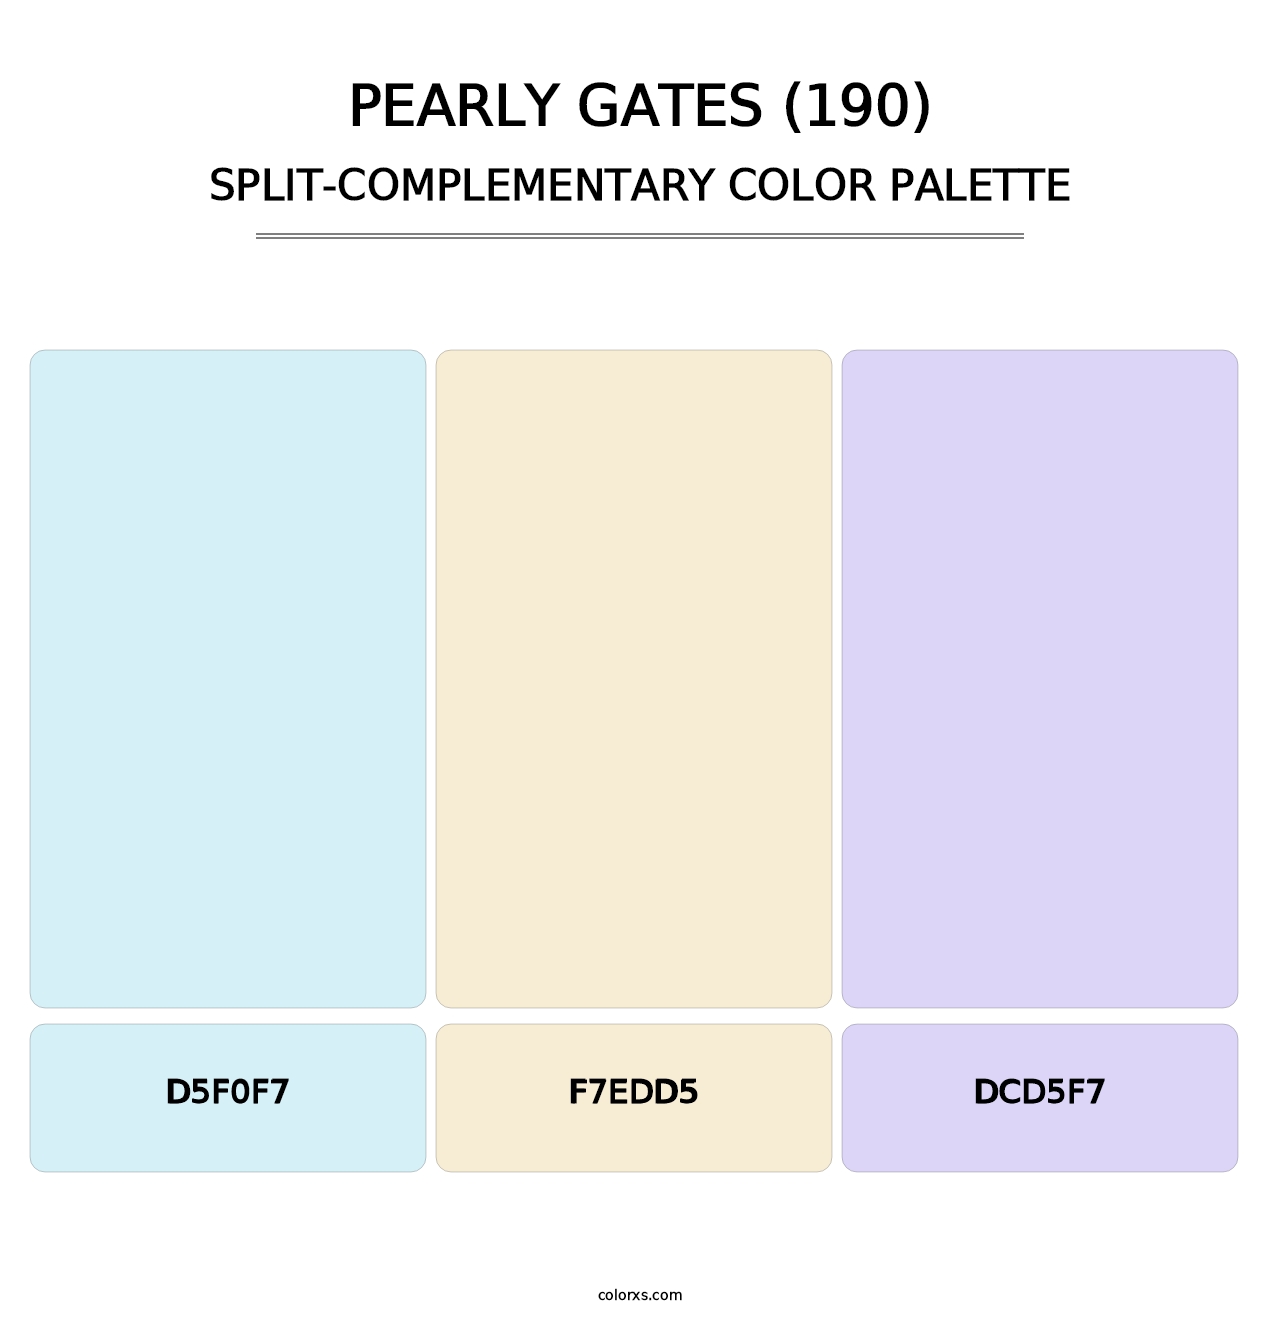 Pearly Gates (190) - Split-Complementary Color Palette